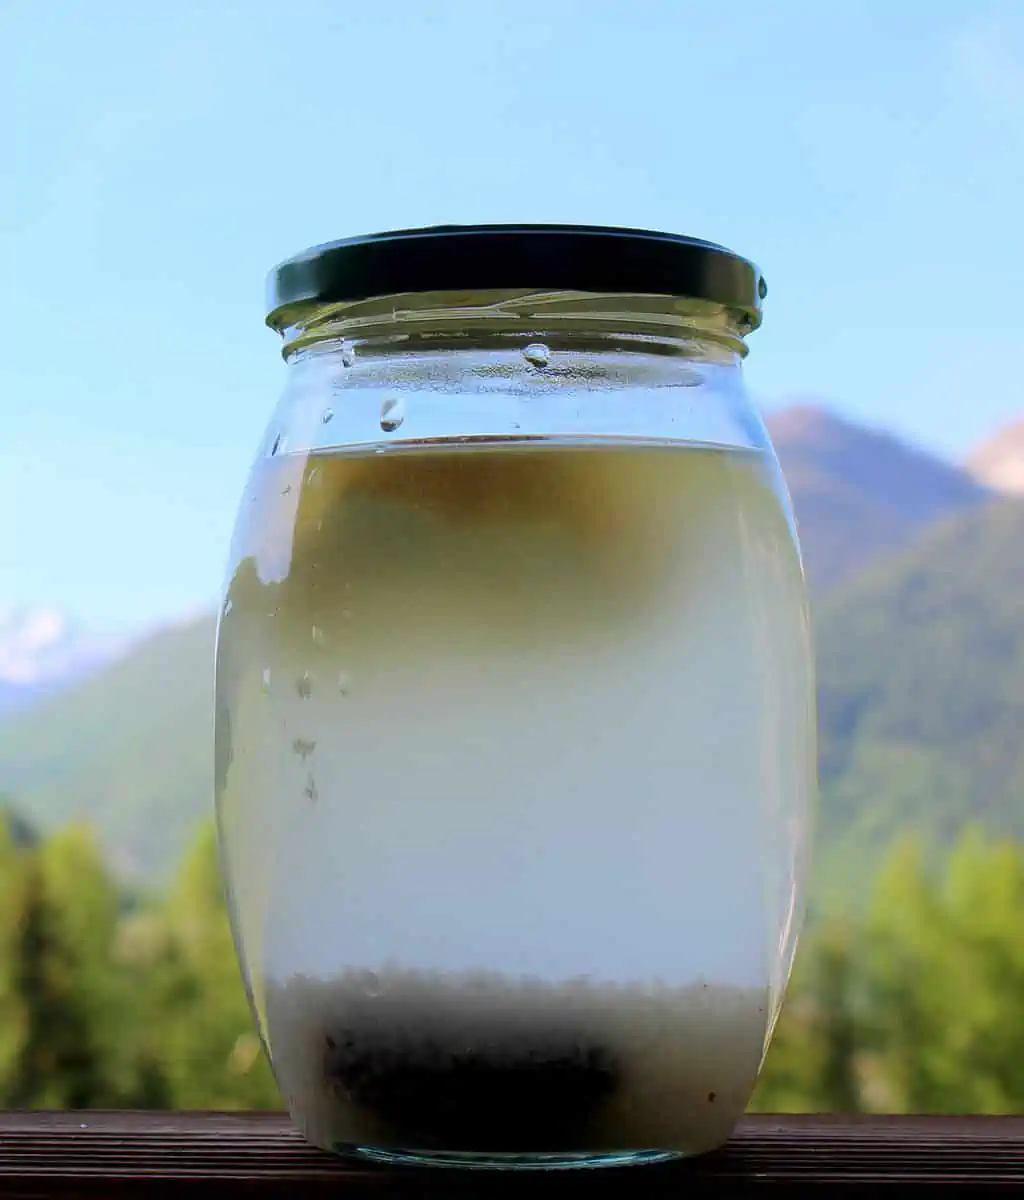 Jar with a fermented beverage